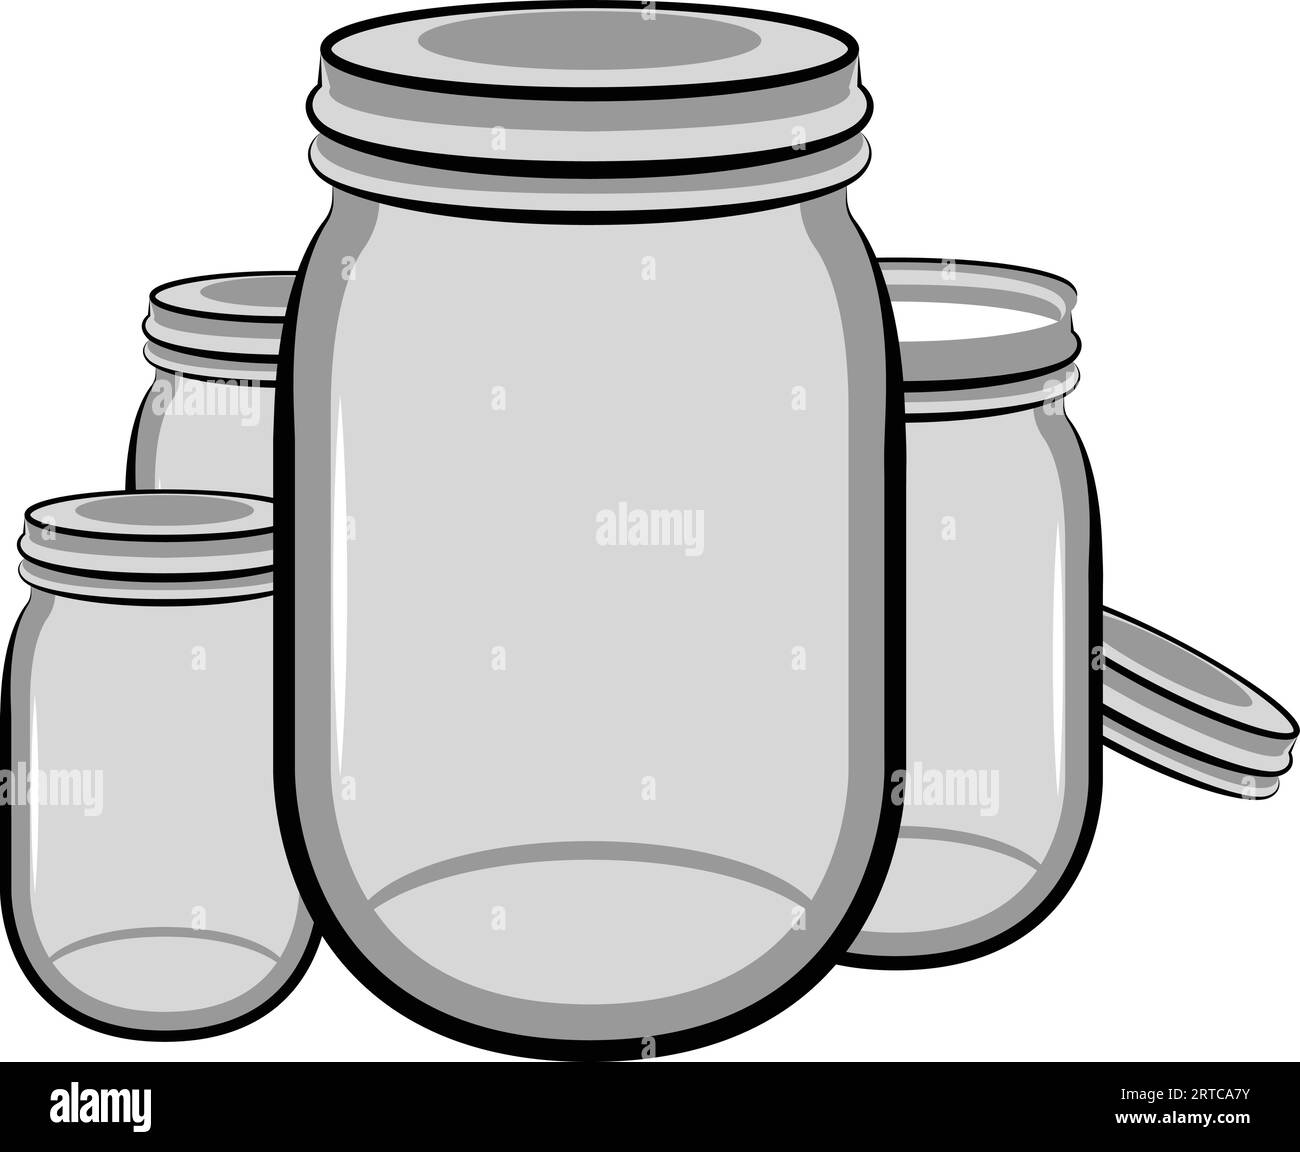 Glass Container Jar with Lid Vector Illustration Stock Vector